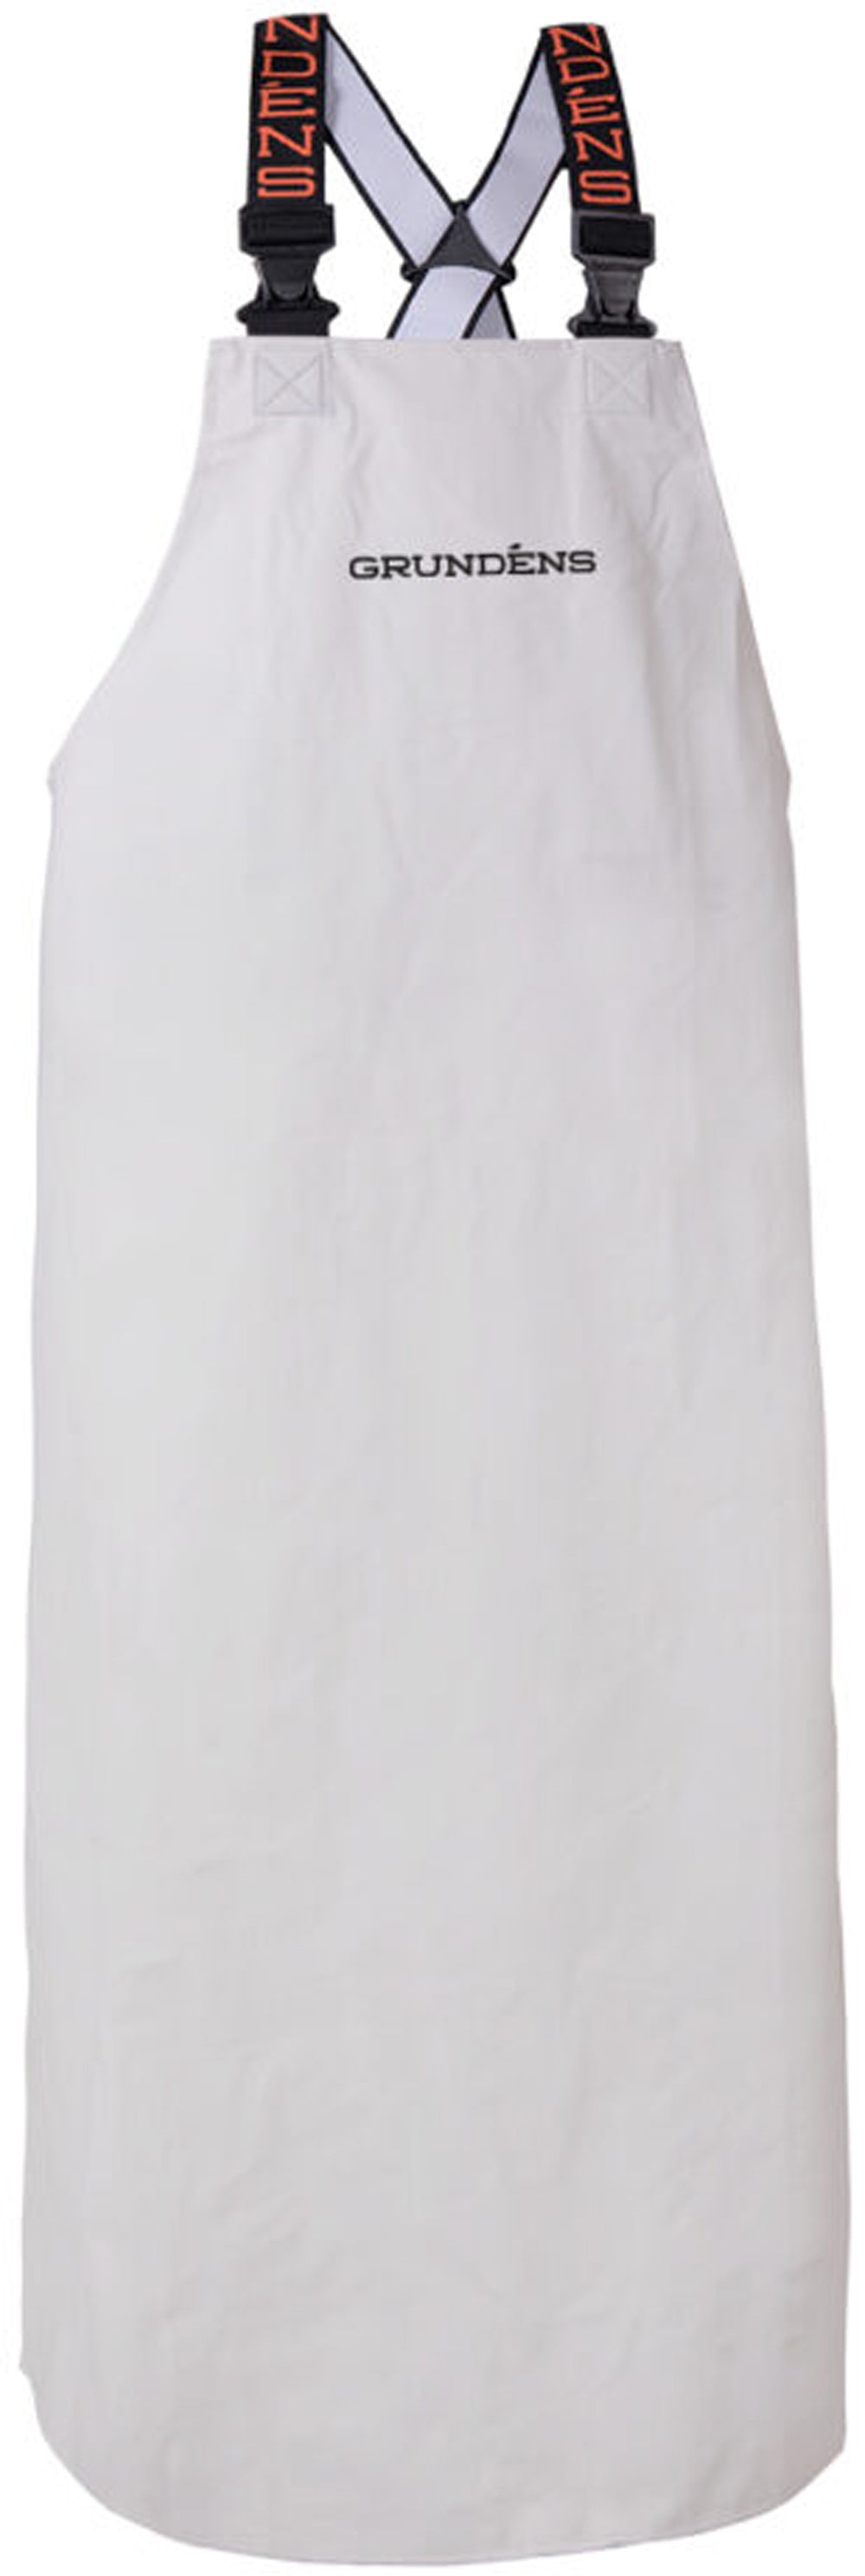 Shoreman PVC Apron in White color from the front view